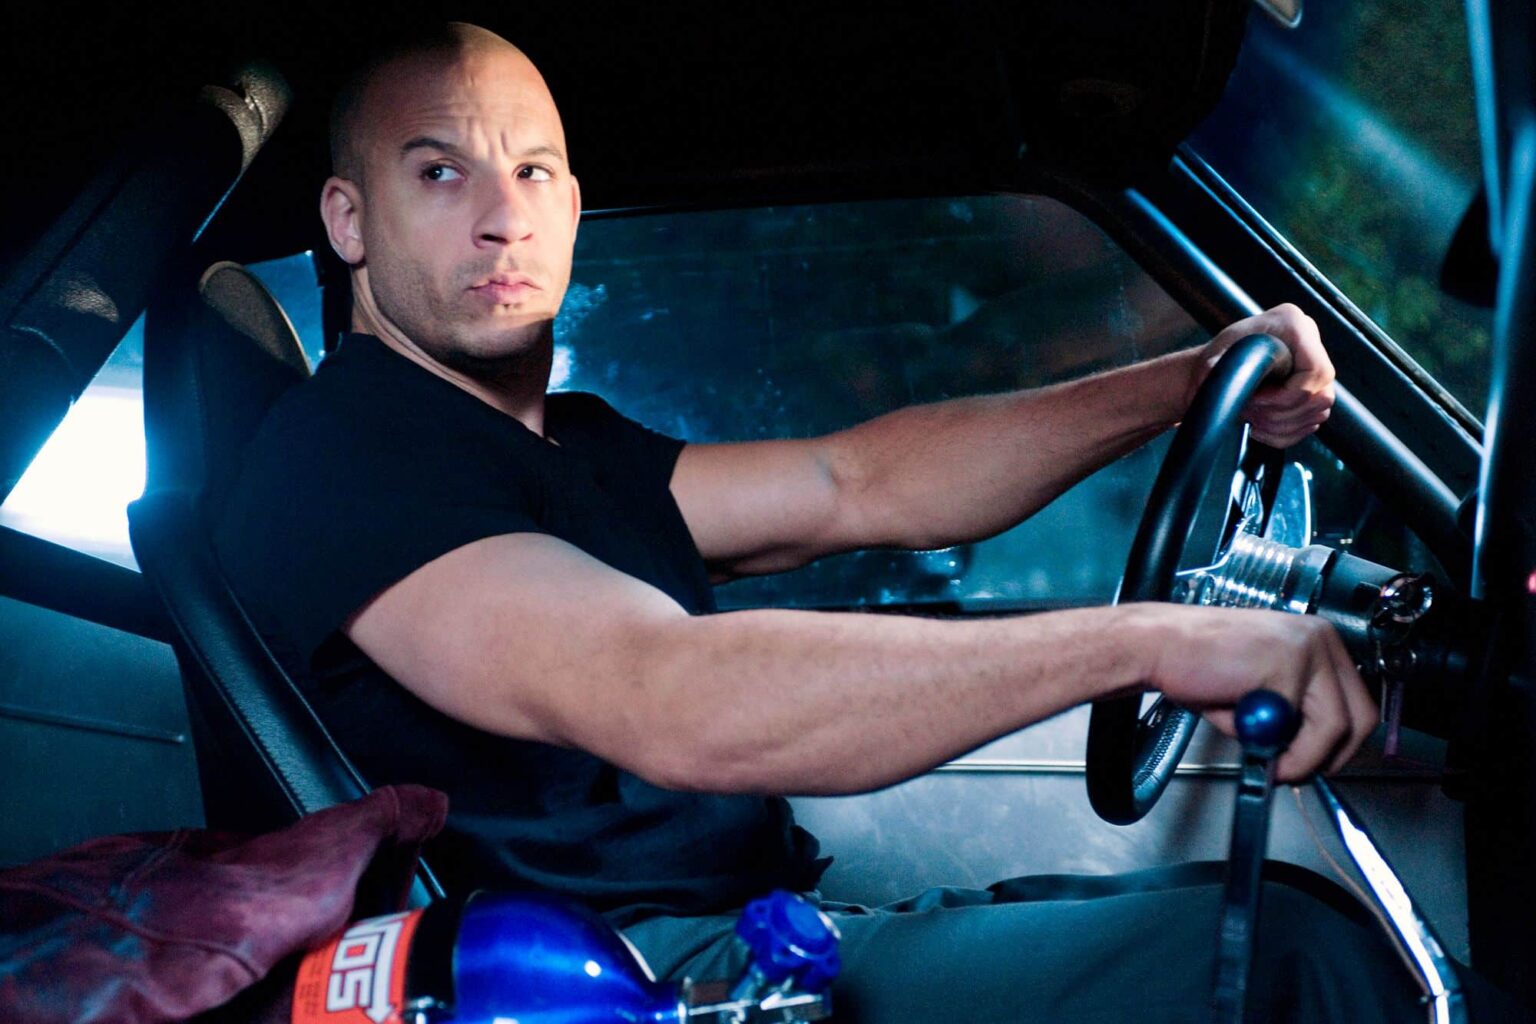 We have a new 'Fast and Furious' movie coming out this summer! Start your engines and race through a rewatch of the entire franchise before F9 premieres!